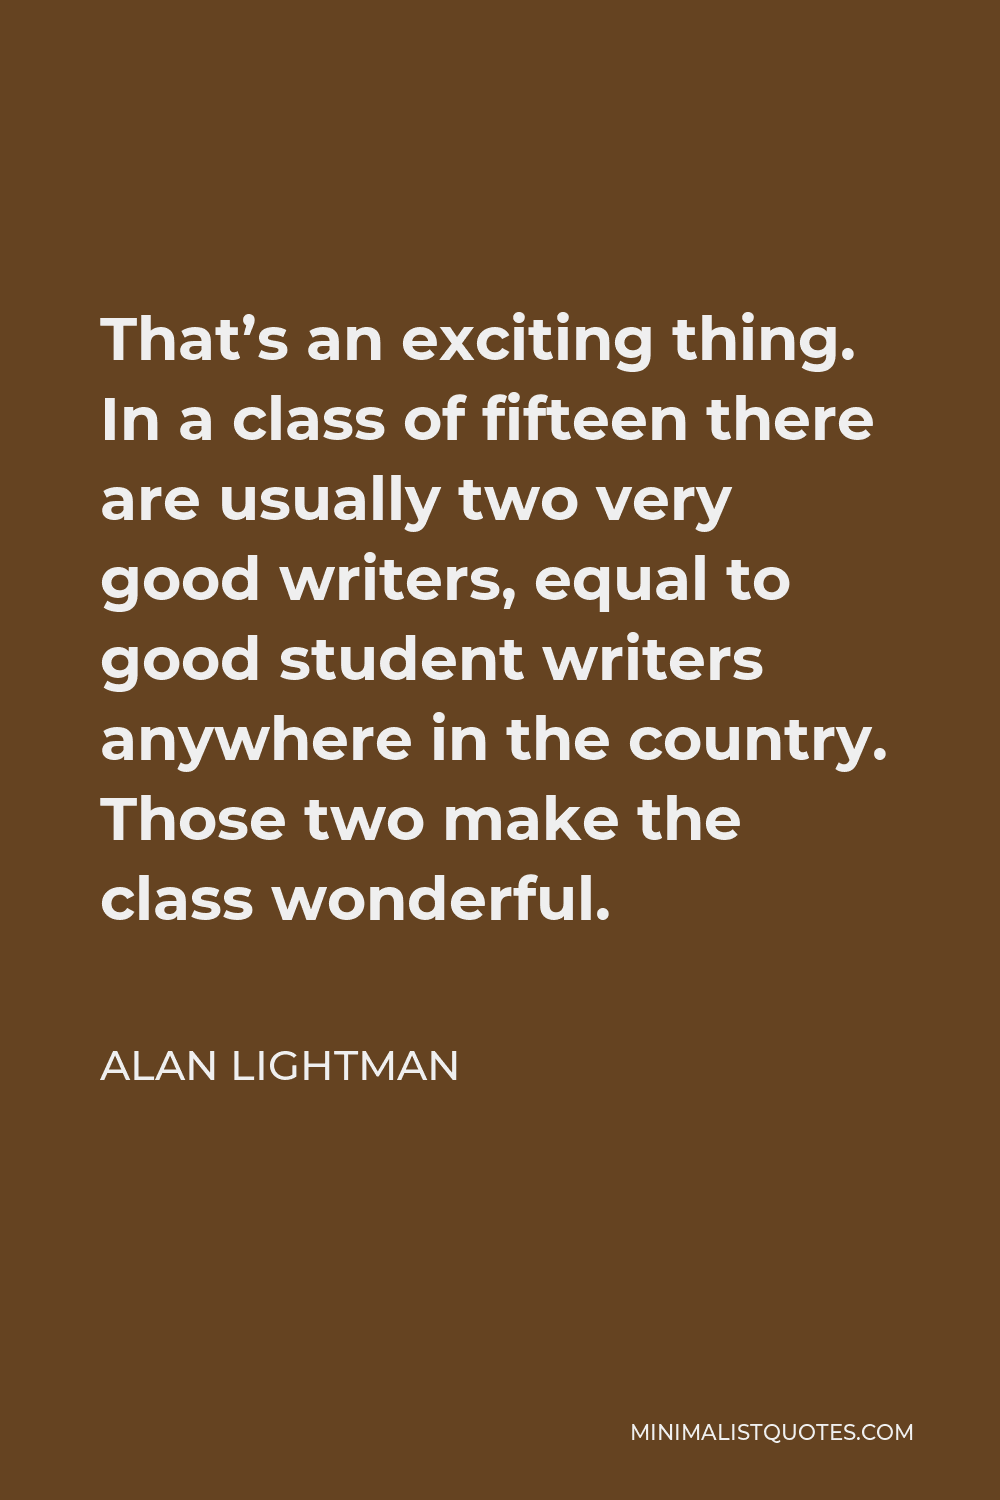 Alan Lightman Quote - That’s an exciting thing. In a class of fifteen there are usually two very good writers, equal to good student writers anywhere in the country. Those two make the class wonderful.